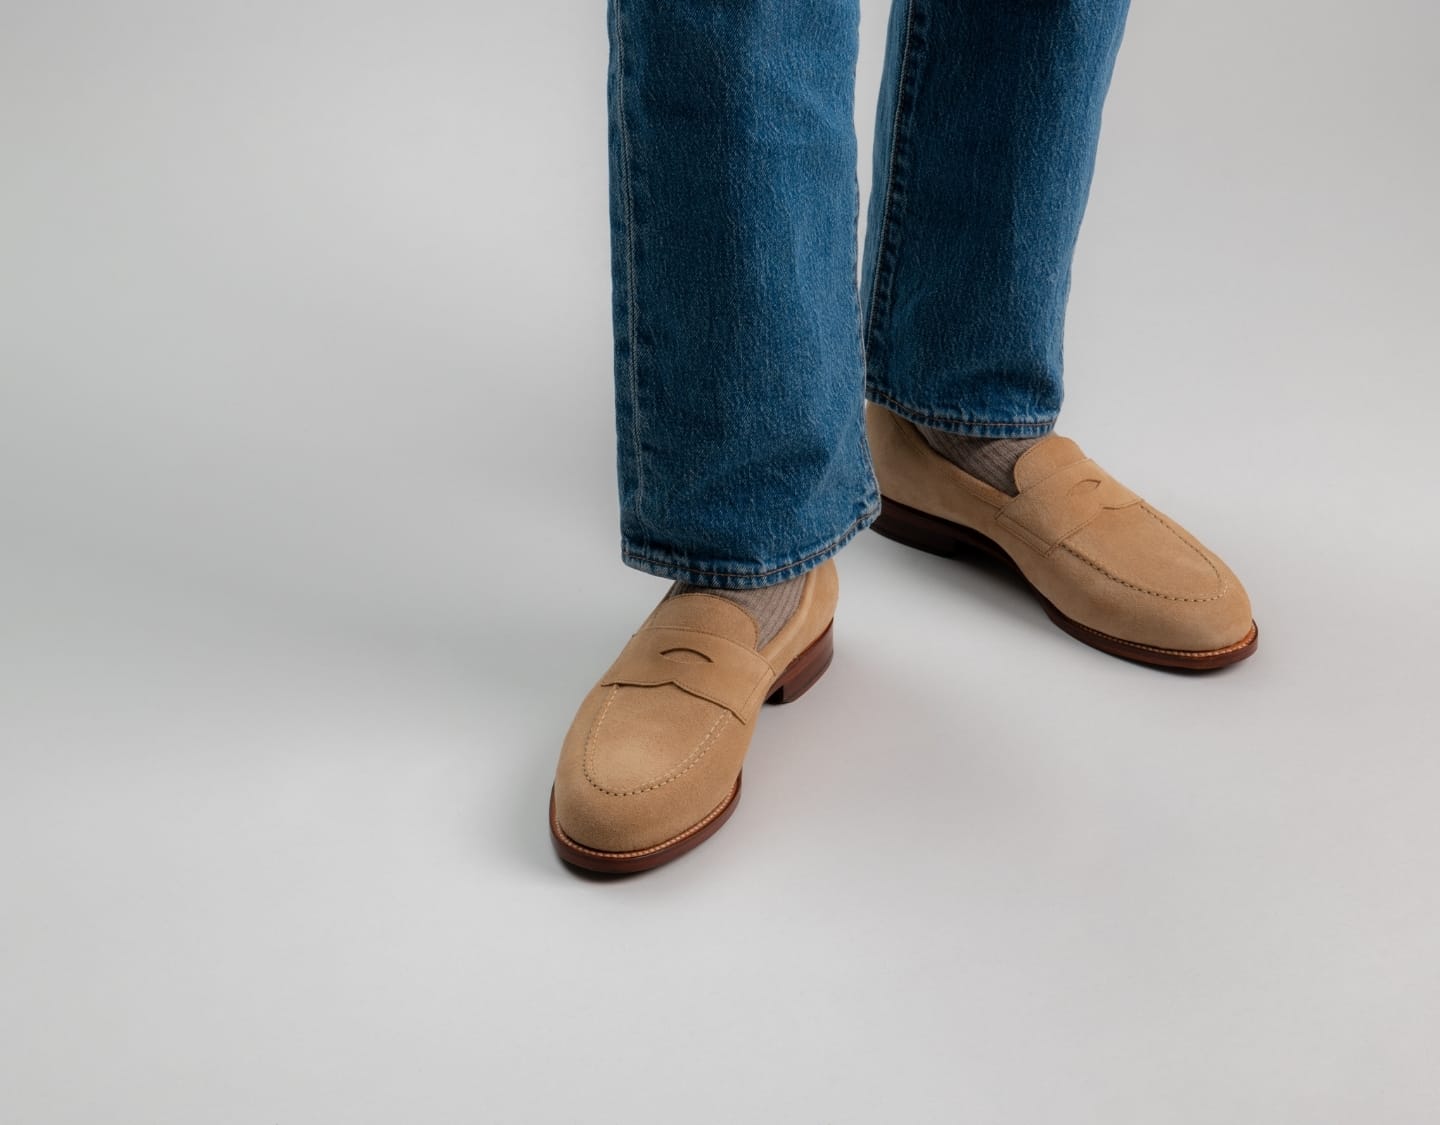 jeans and loafers combination